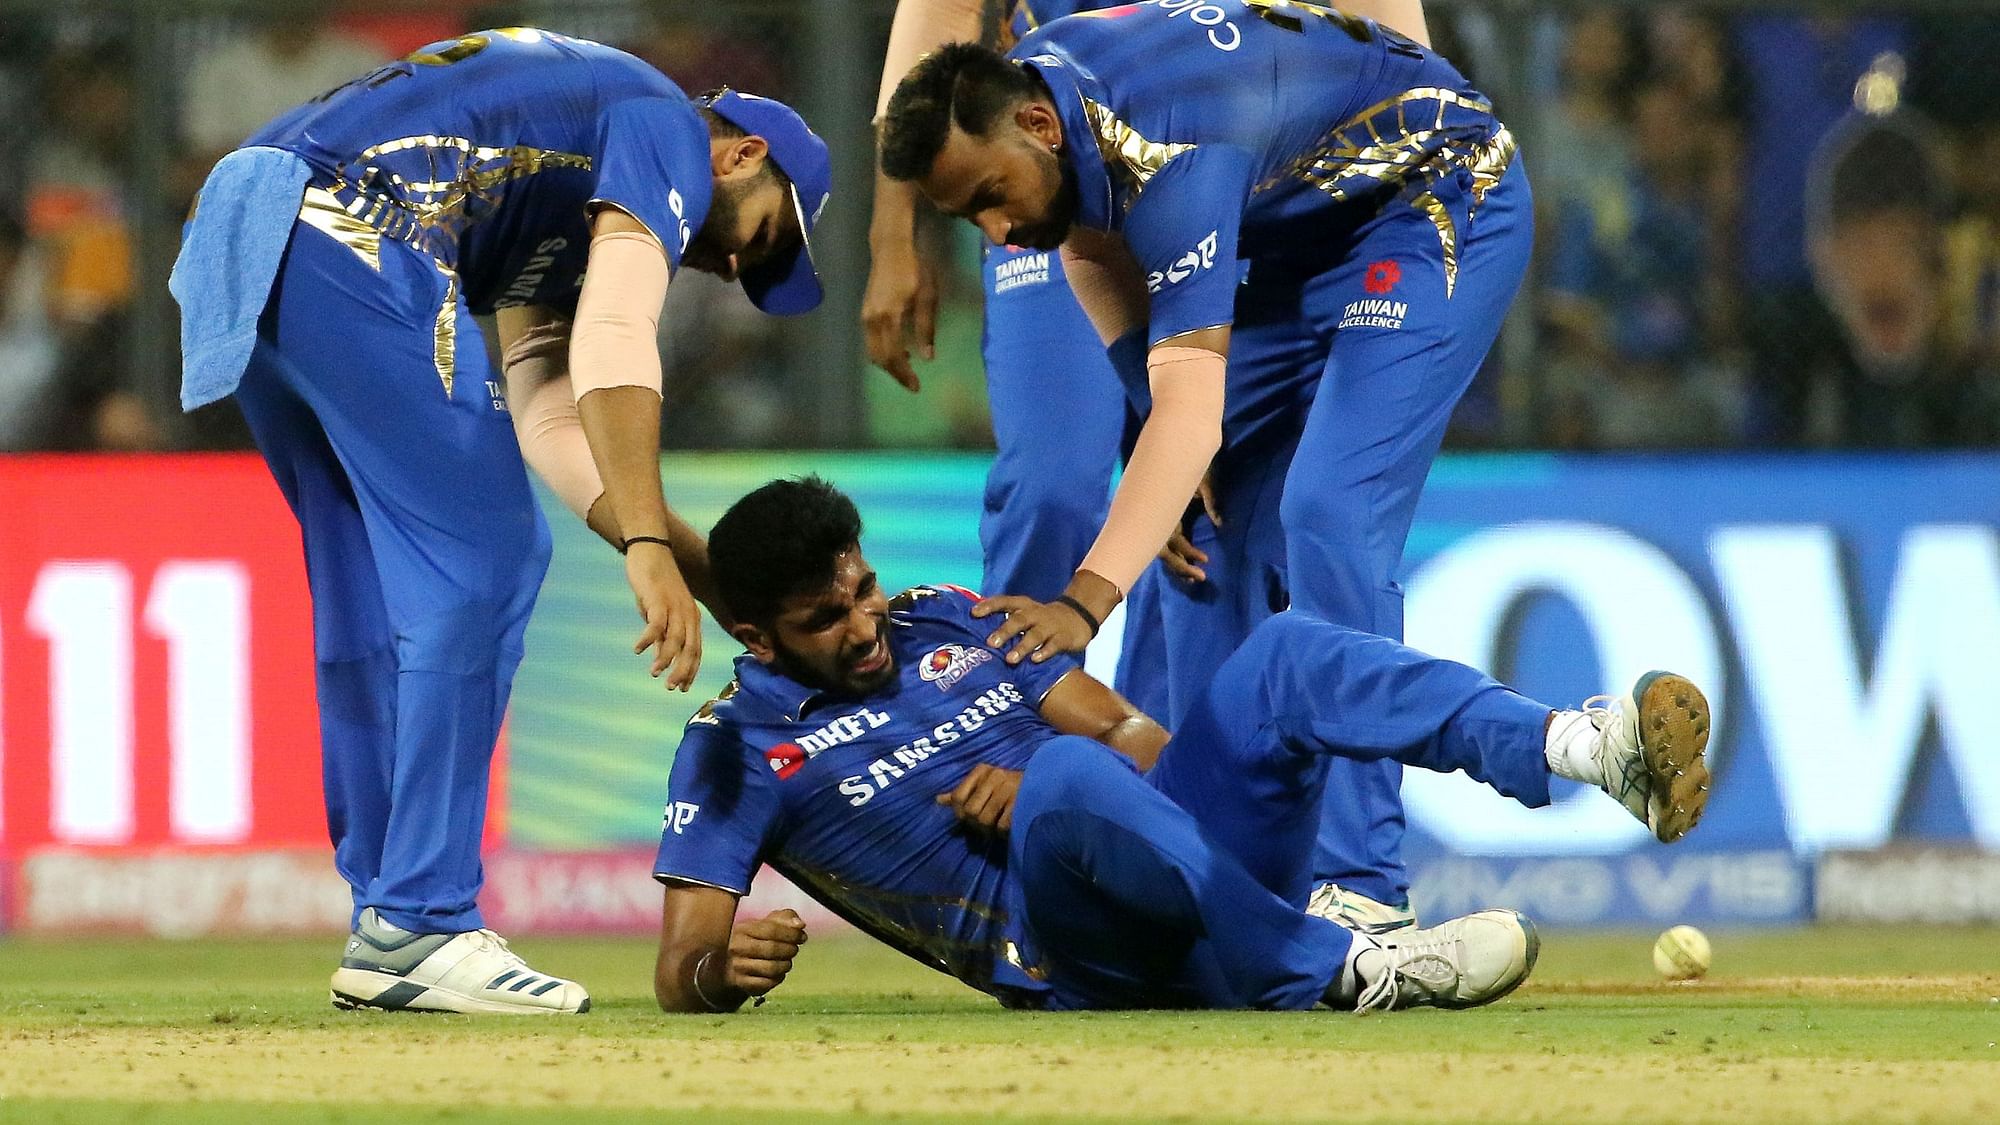 Jasprit Bumrah suffered the injury when he fell while bowling the team’s final over.